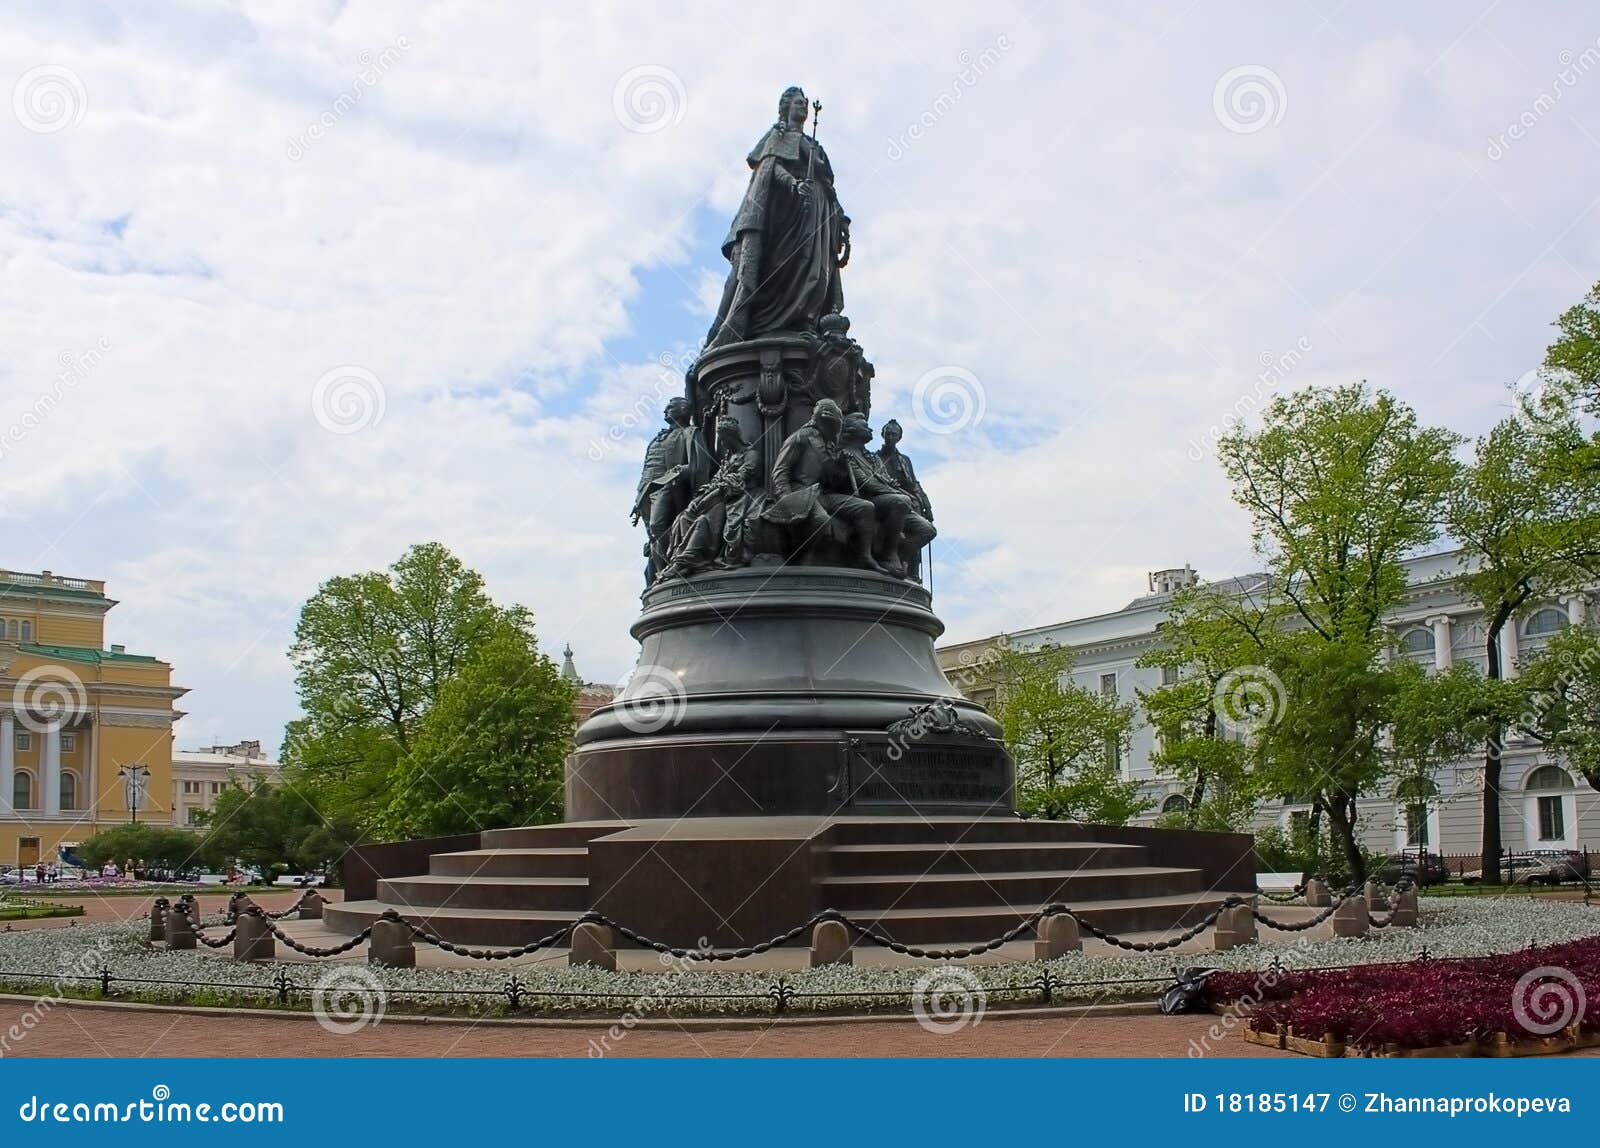 Monument to Catherine the Great against sky,Saint Petersburg, Russia.